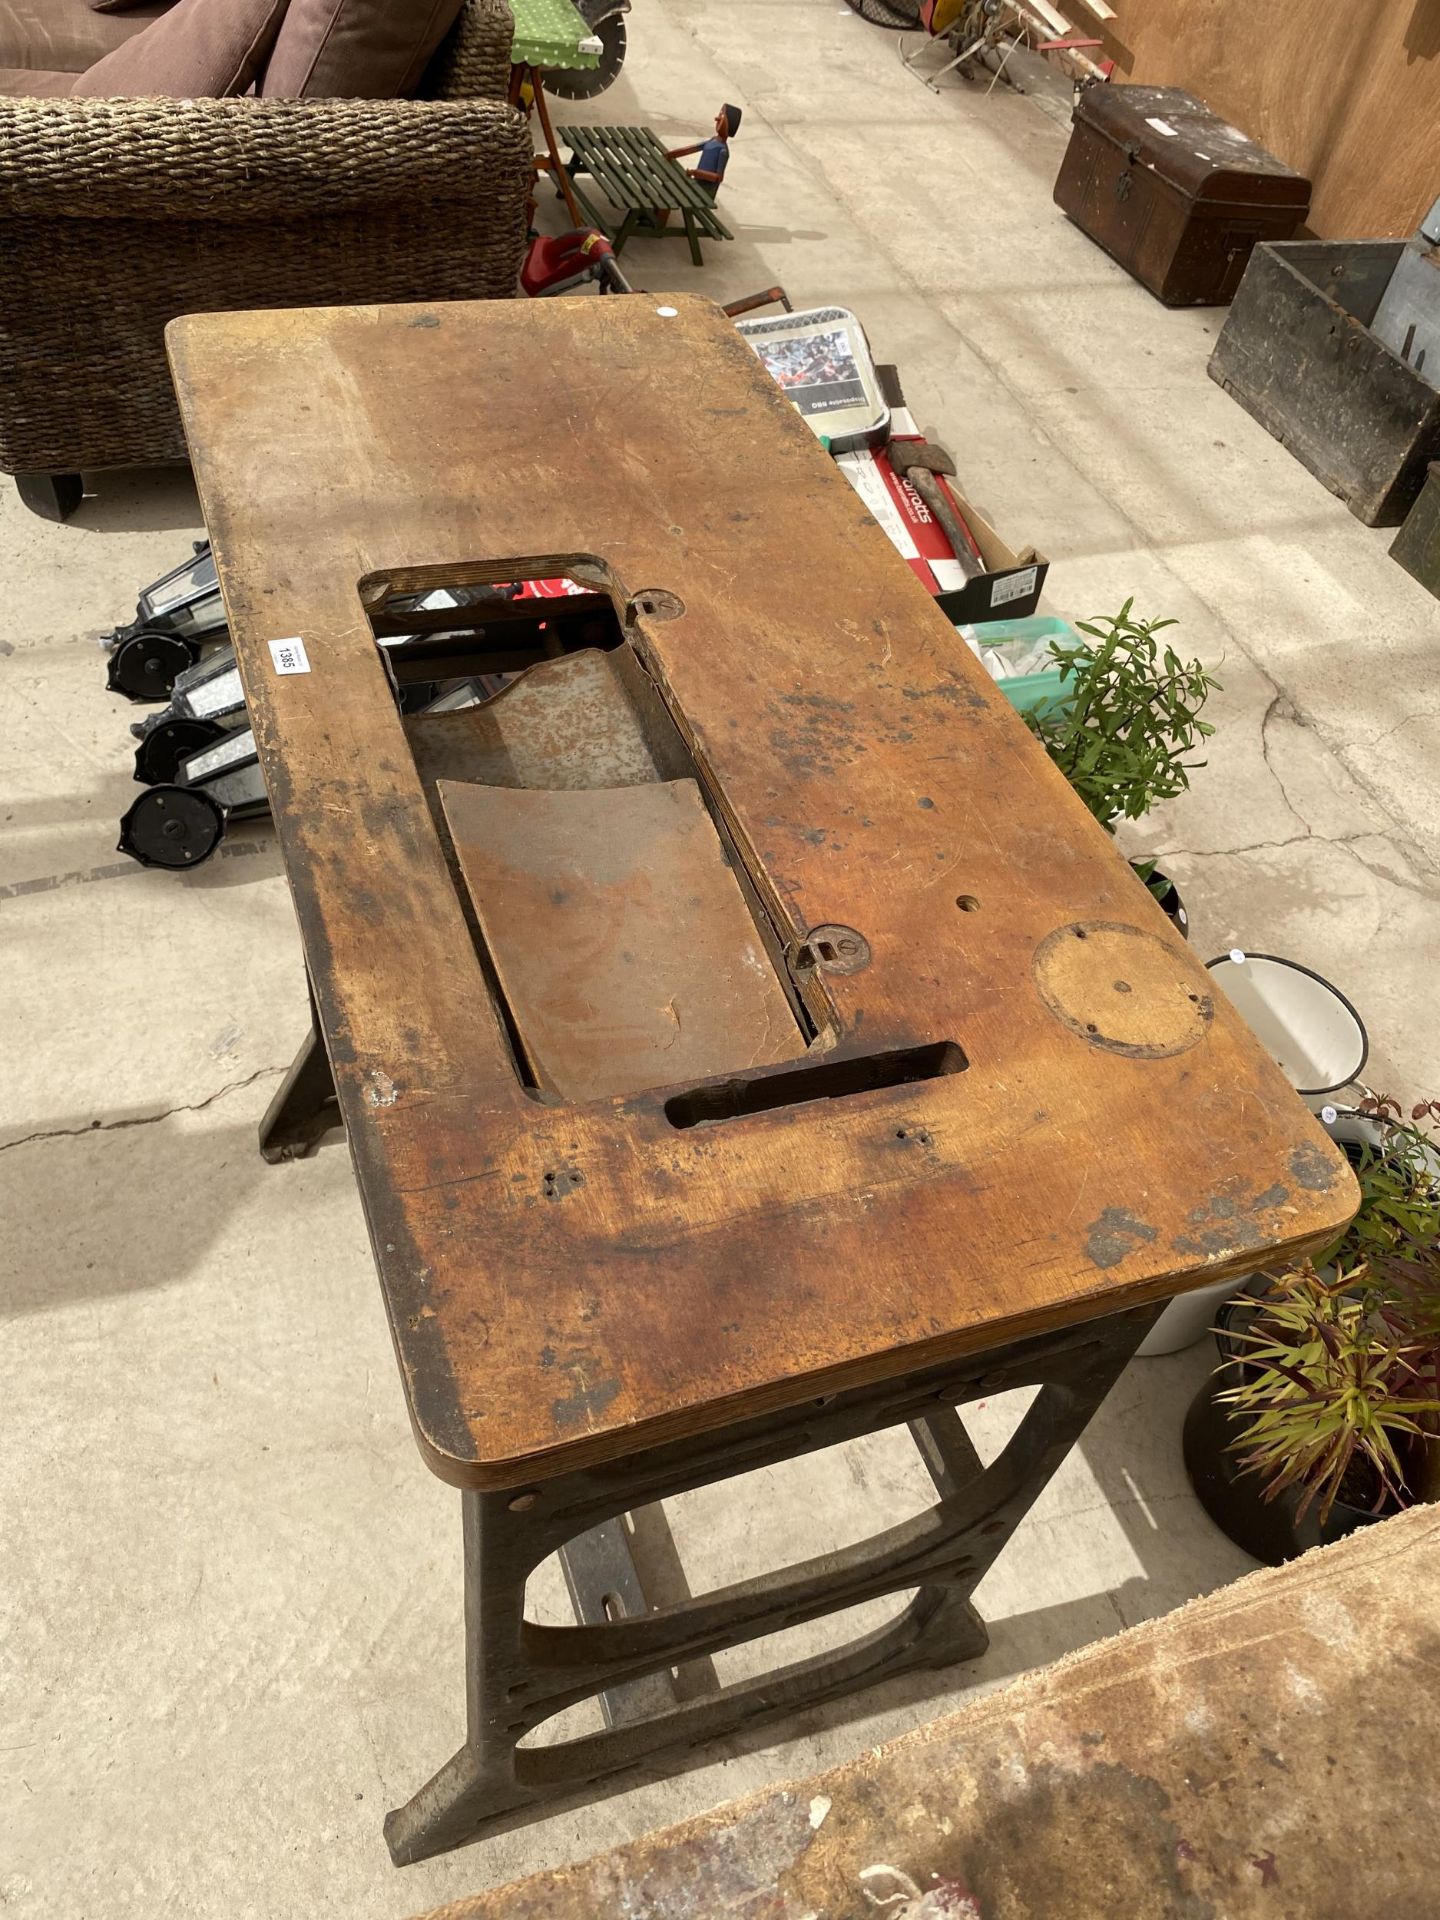 AN INDUSTRIAL SEWING MACHINE TABLE WITH HEAVY CAST IRON BASE - Image 2 of 4